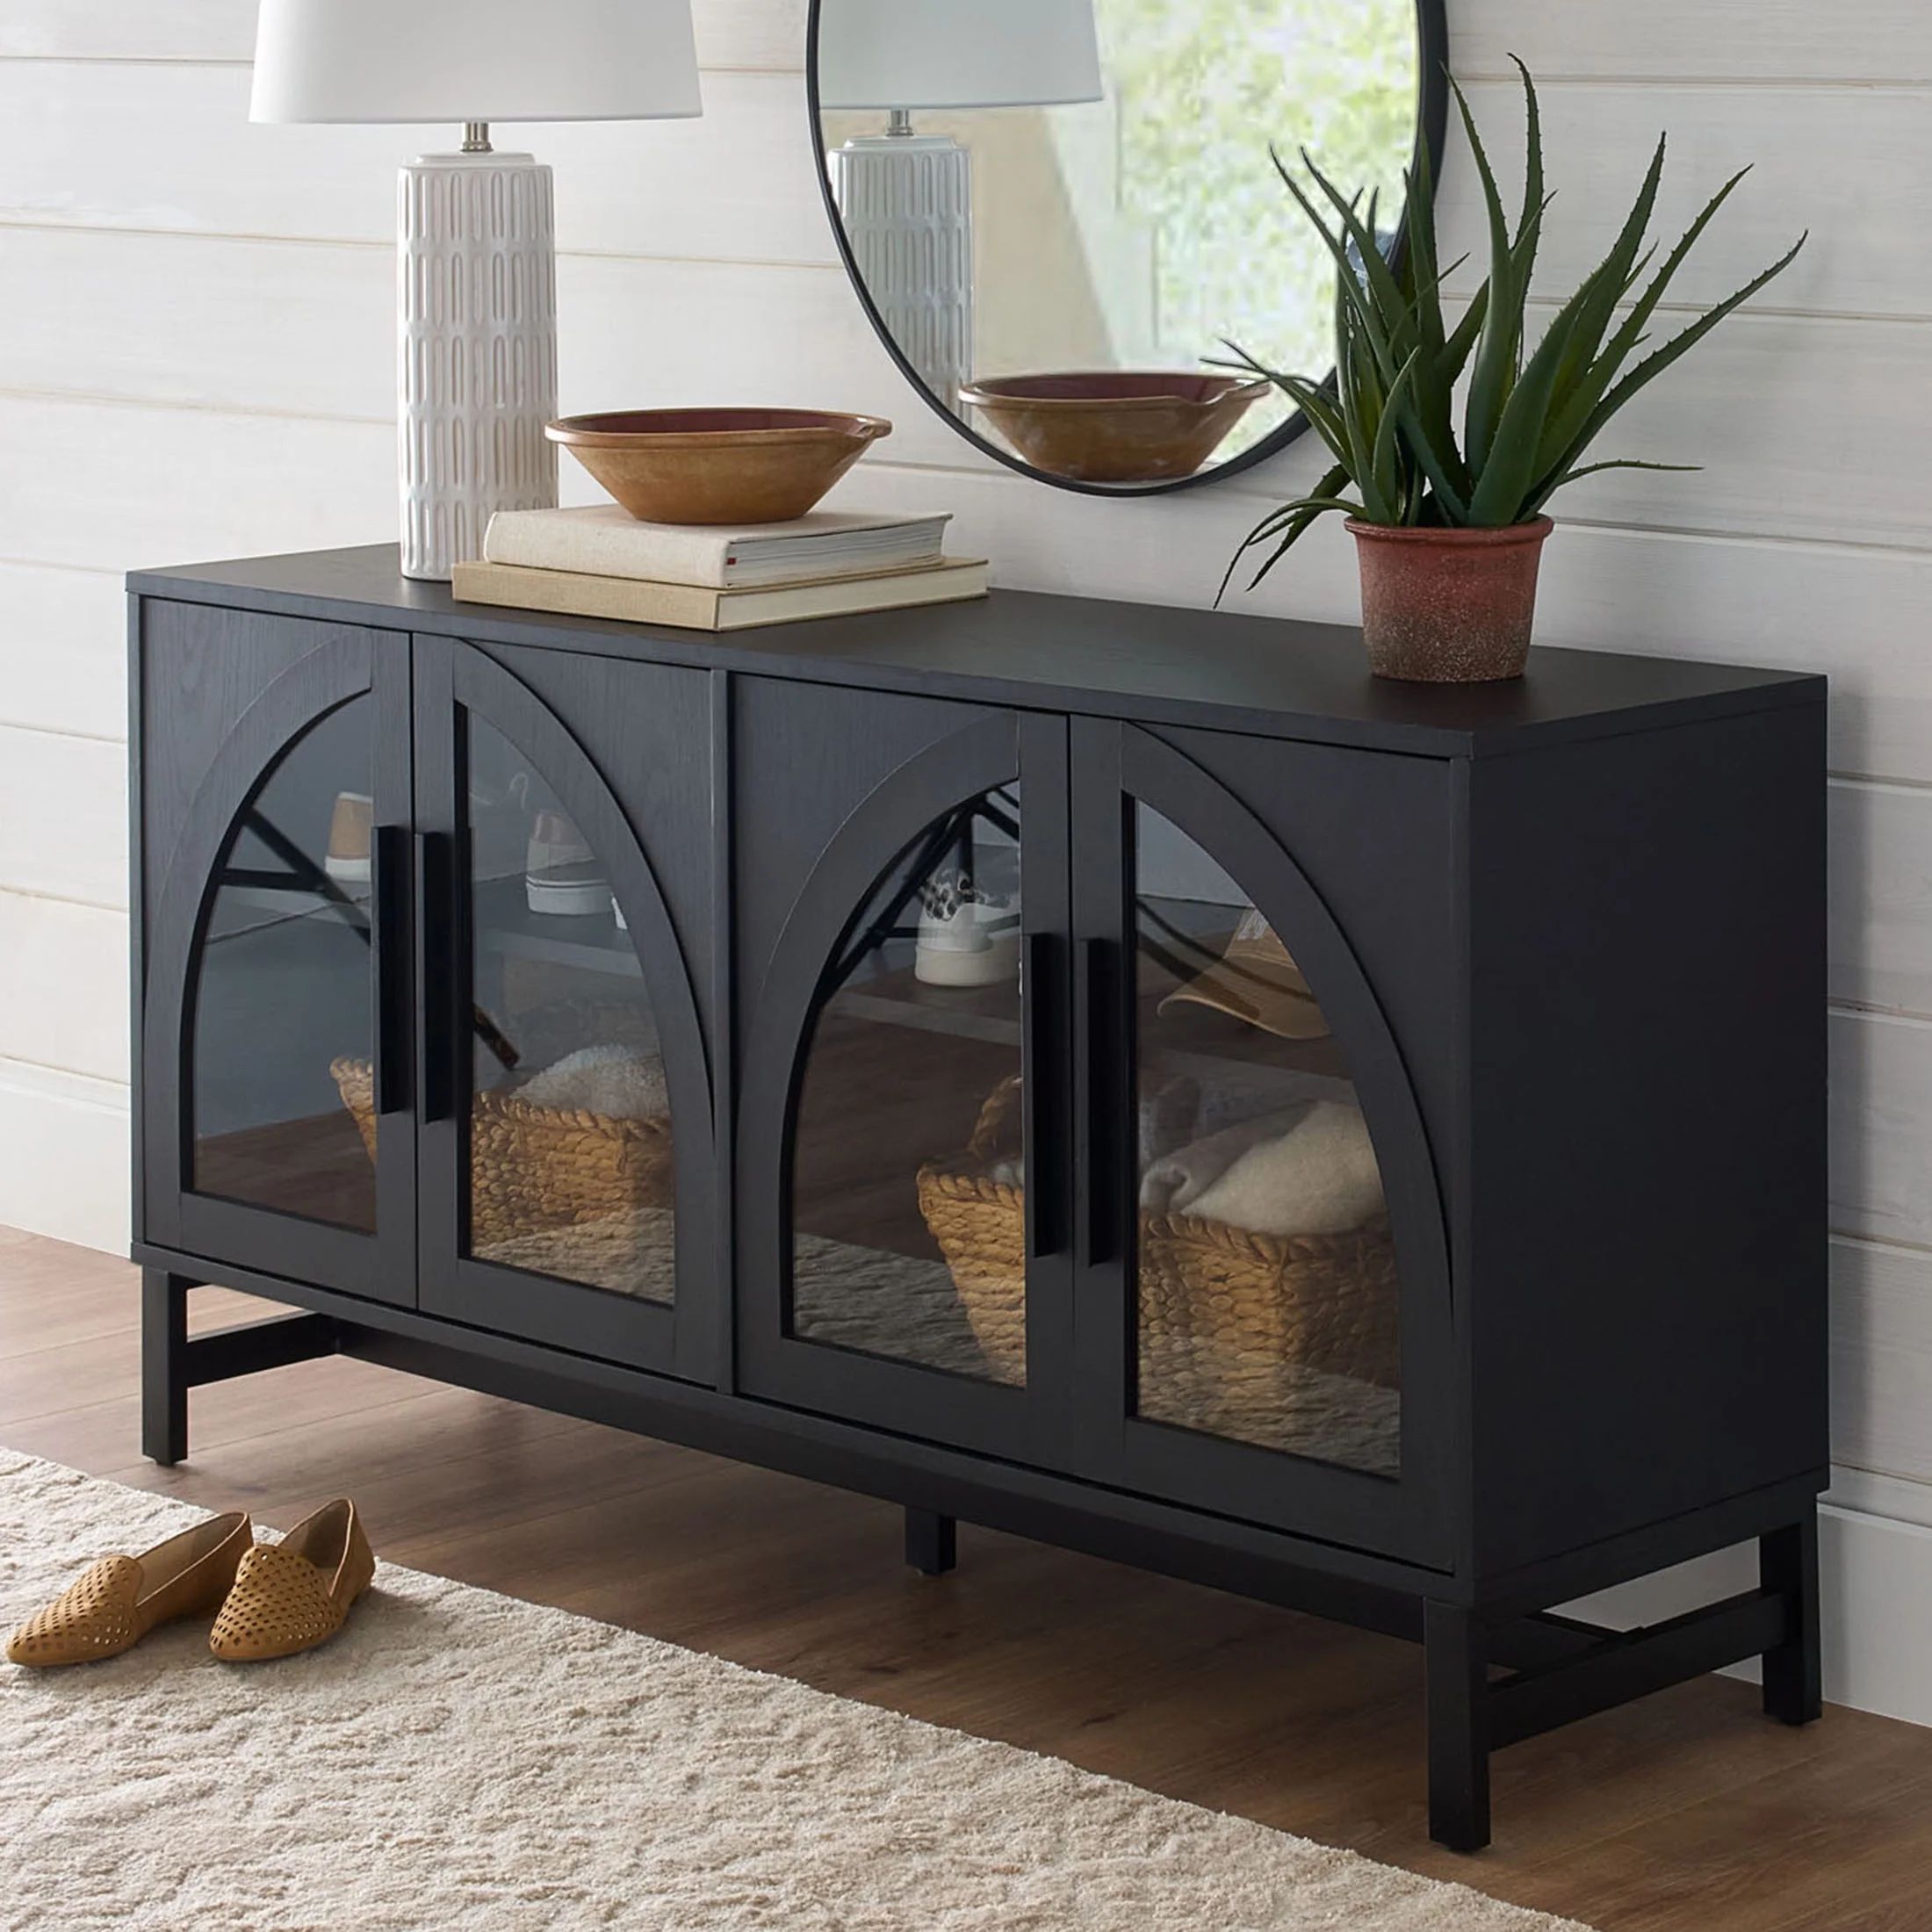 Better Homes & Gardens Juliet Arc TV Stand for TVs up to 65”, Black Wood Finish | Walmart (US)